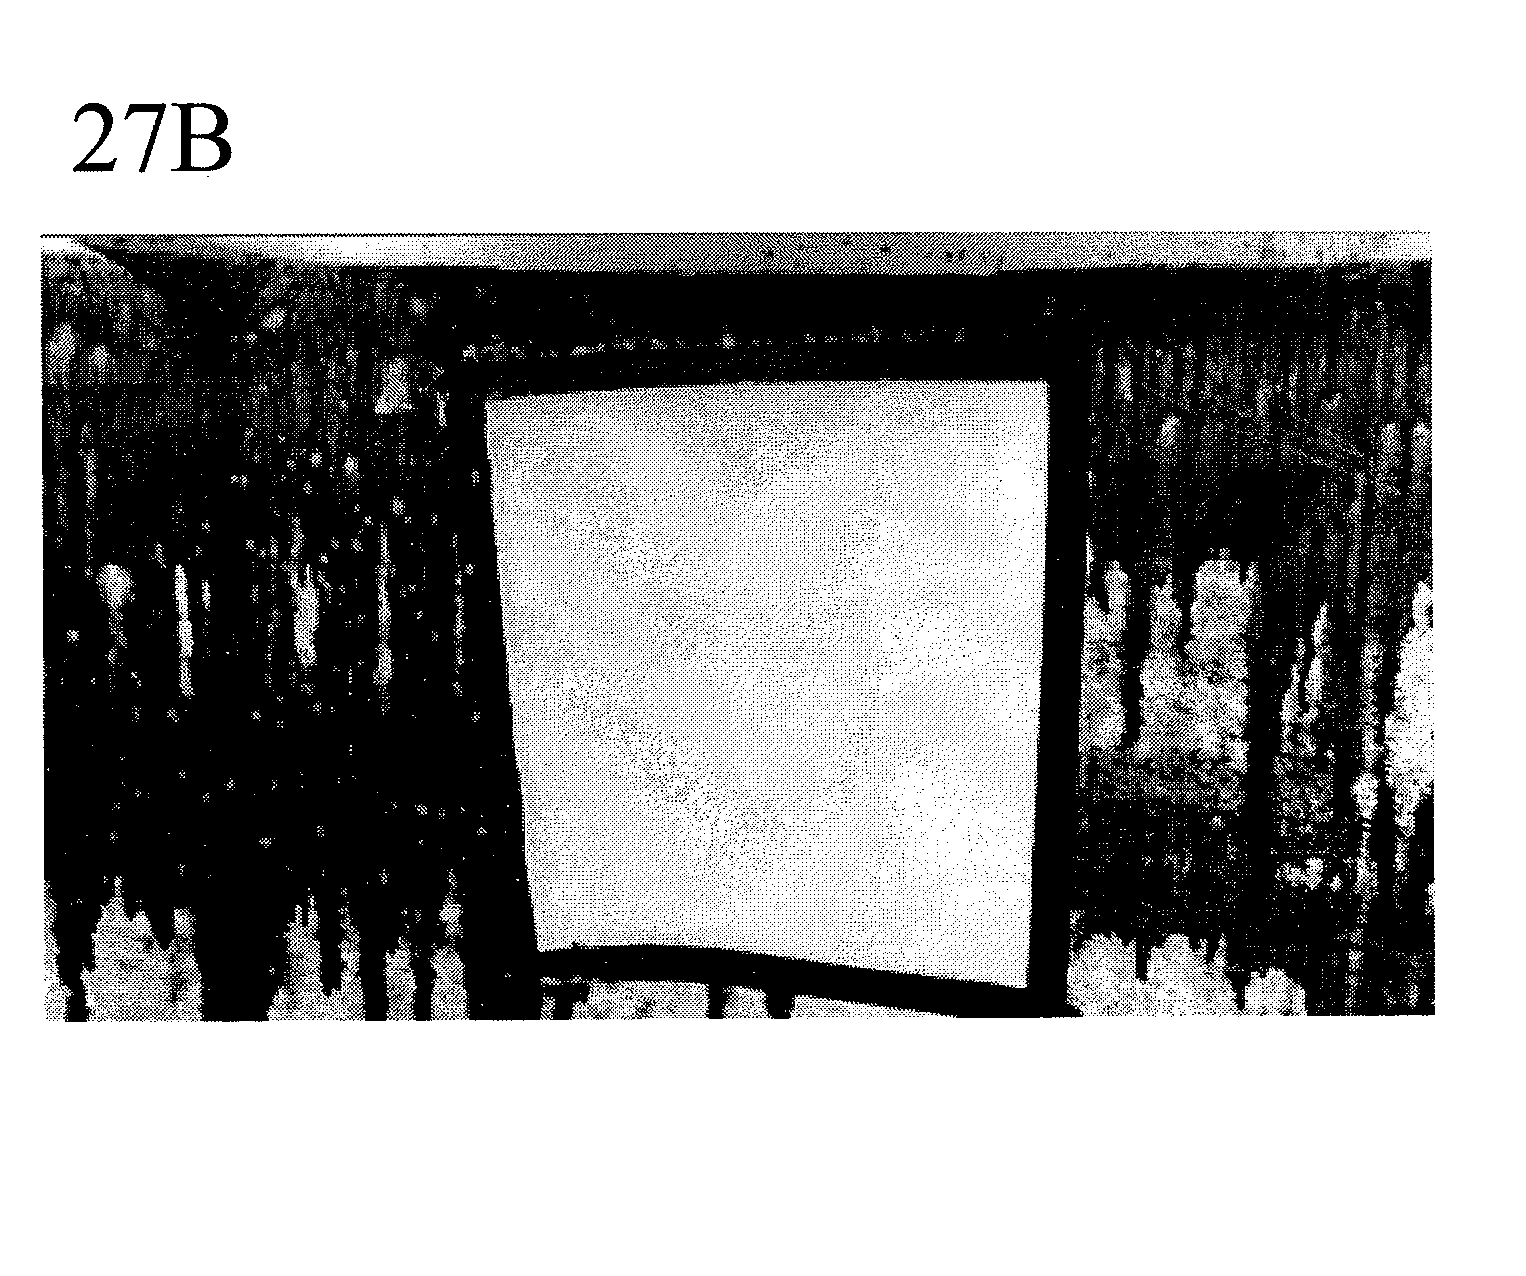 Compositions and methods for oil spill remediation